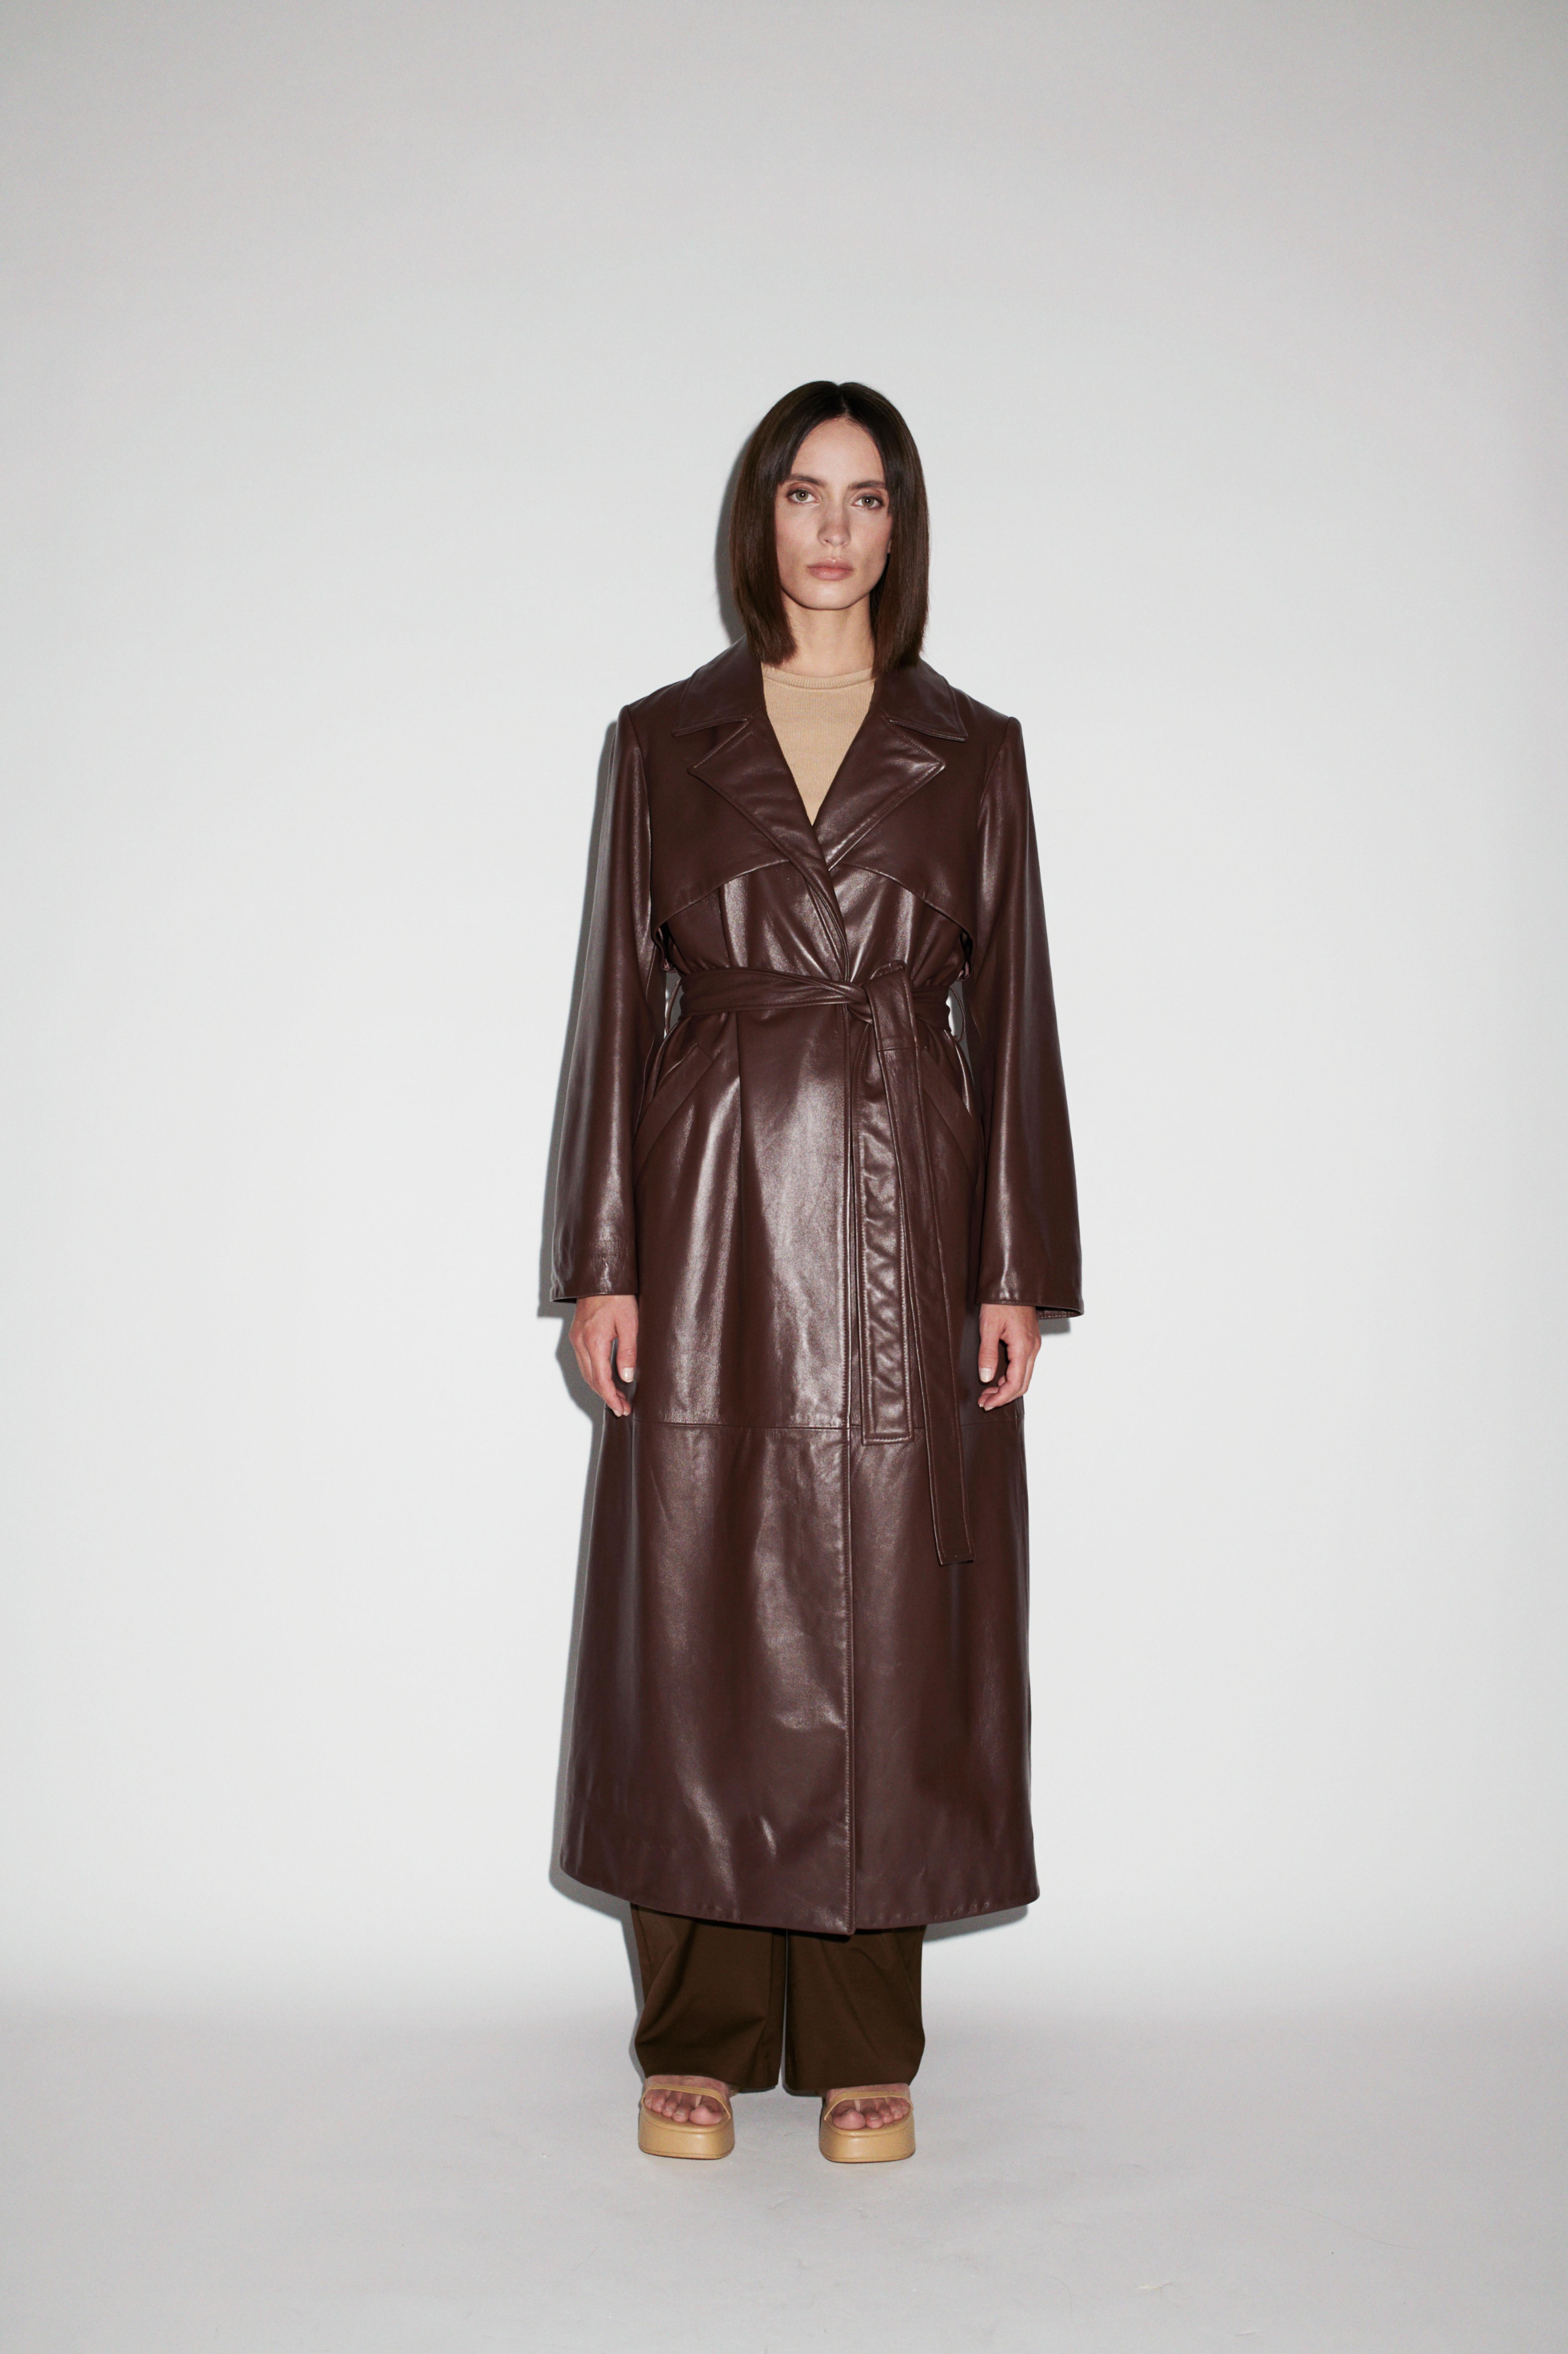 Verheyen London Leather Trench Coat in Black - Size uk 12

Handmade in London, made with 100% Italian Lambs Leather this luxury item is an investment piece to wear for a lifetime.  This piece is made by artisans in London, expert artisans who make